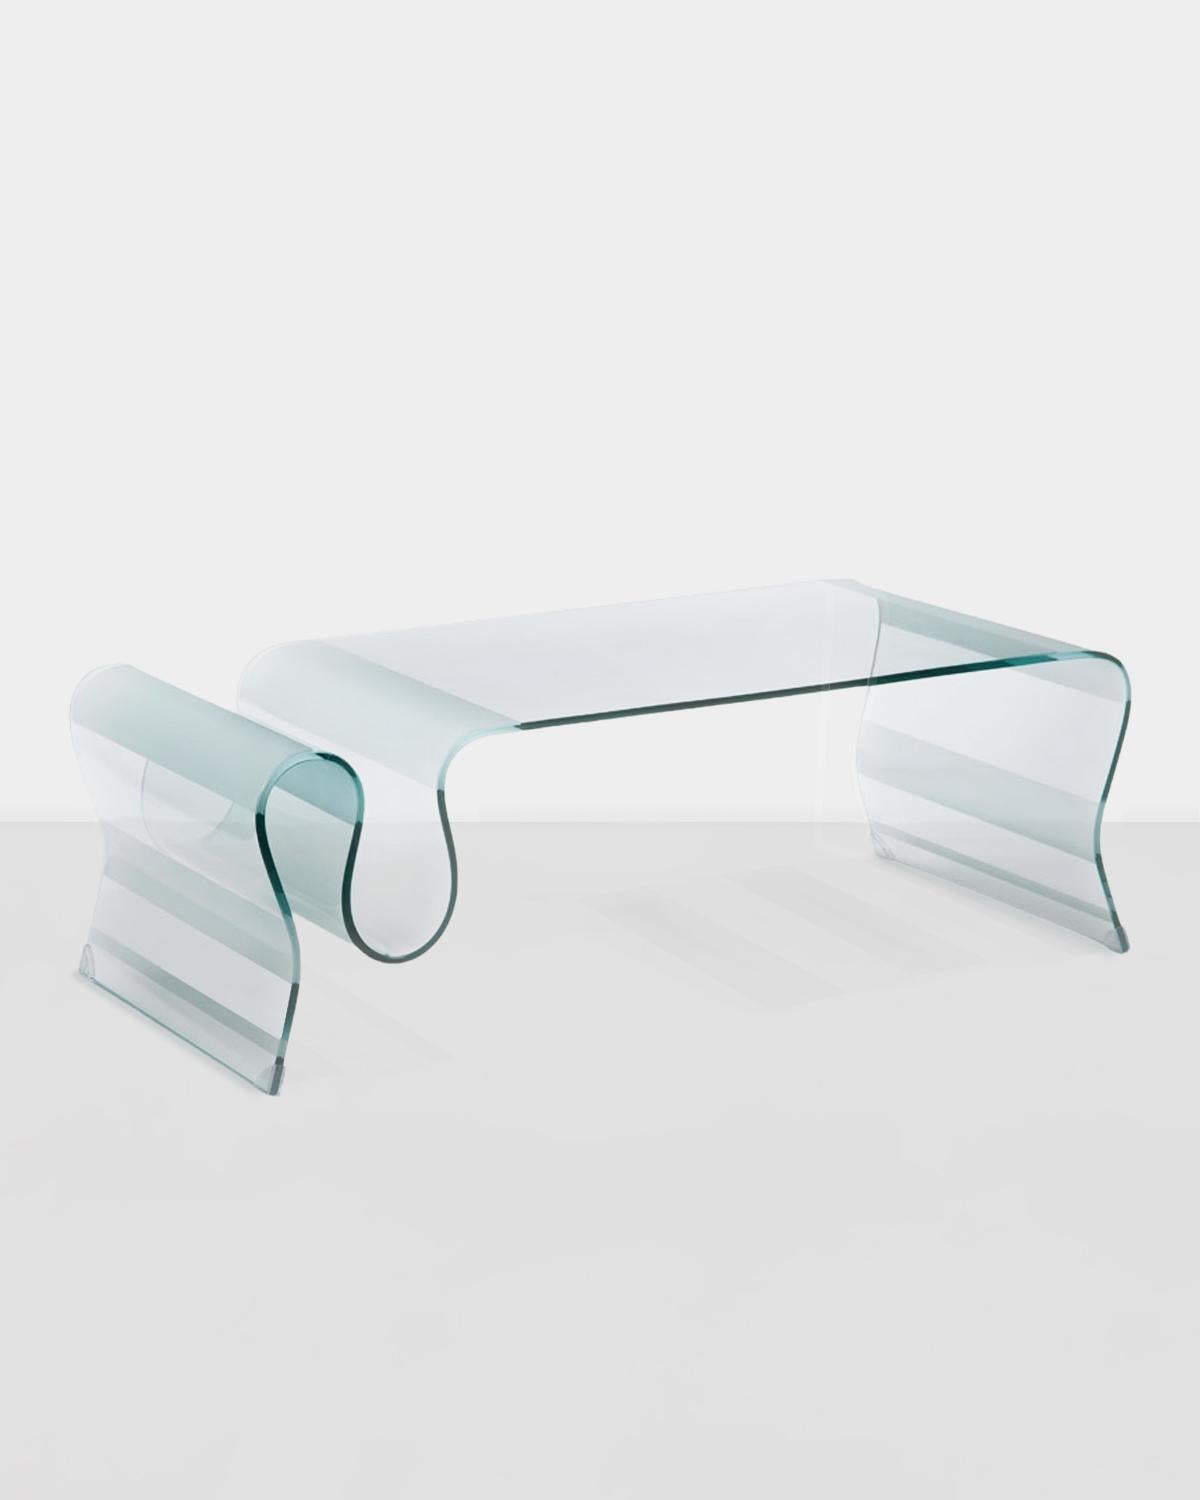 1980s undulating glass coffee table w/ frosted accents. The wave portion of the table could be used as storage for magazines etc. Item is in good vintage condition and is structurally sound. Please expect wear consistent with it's age.